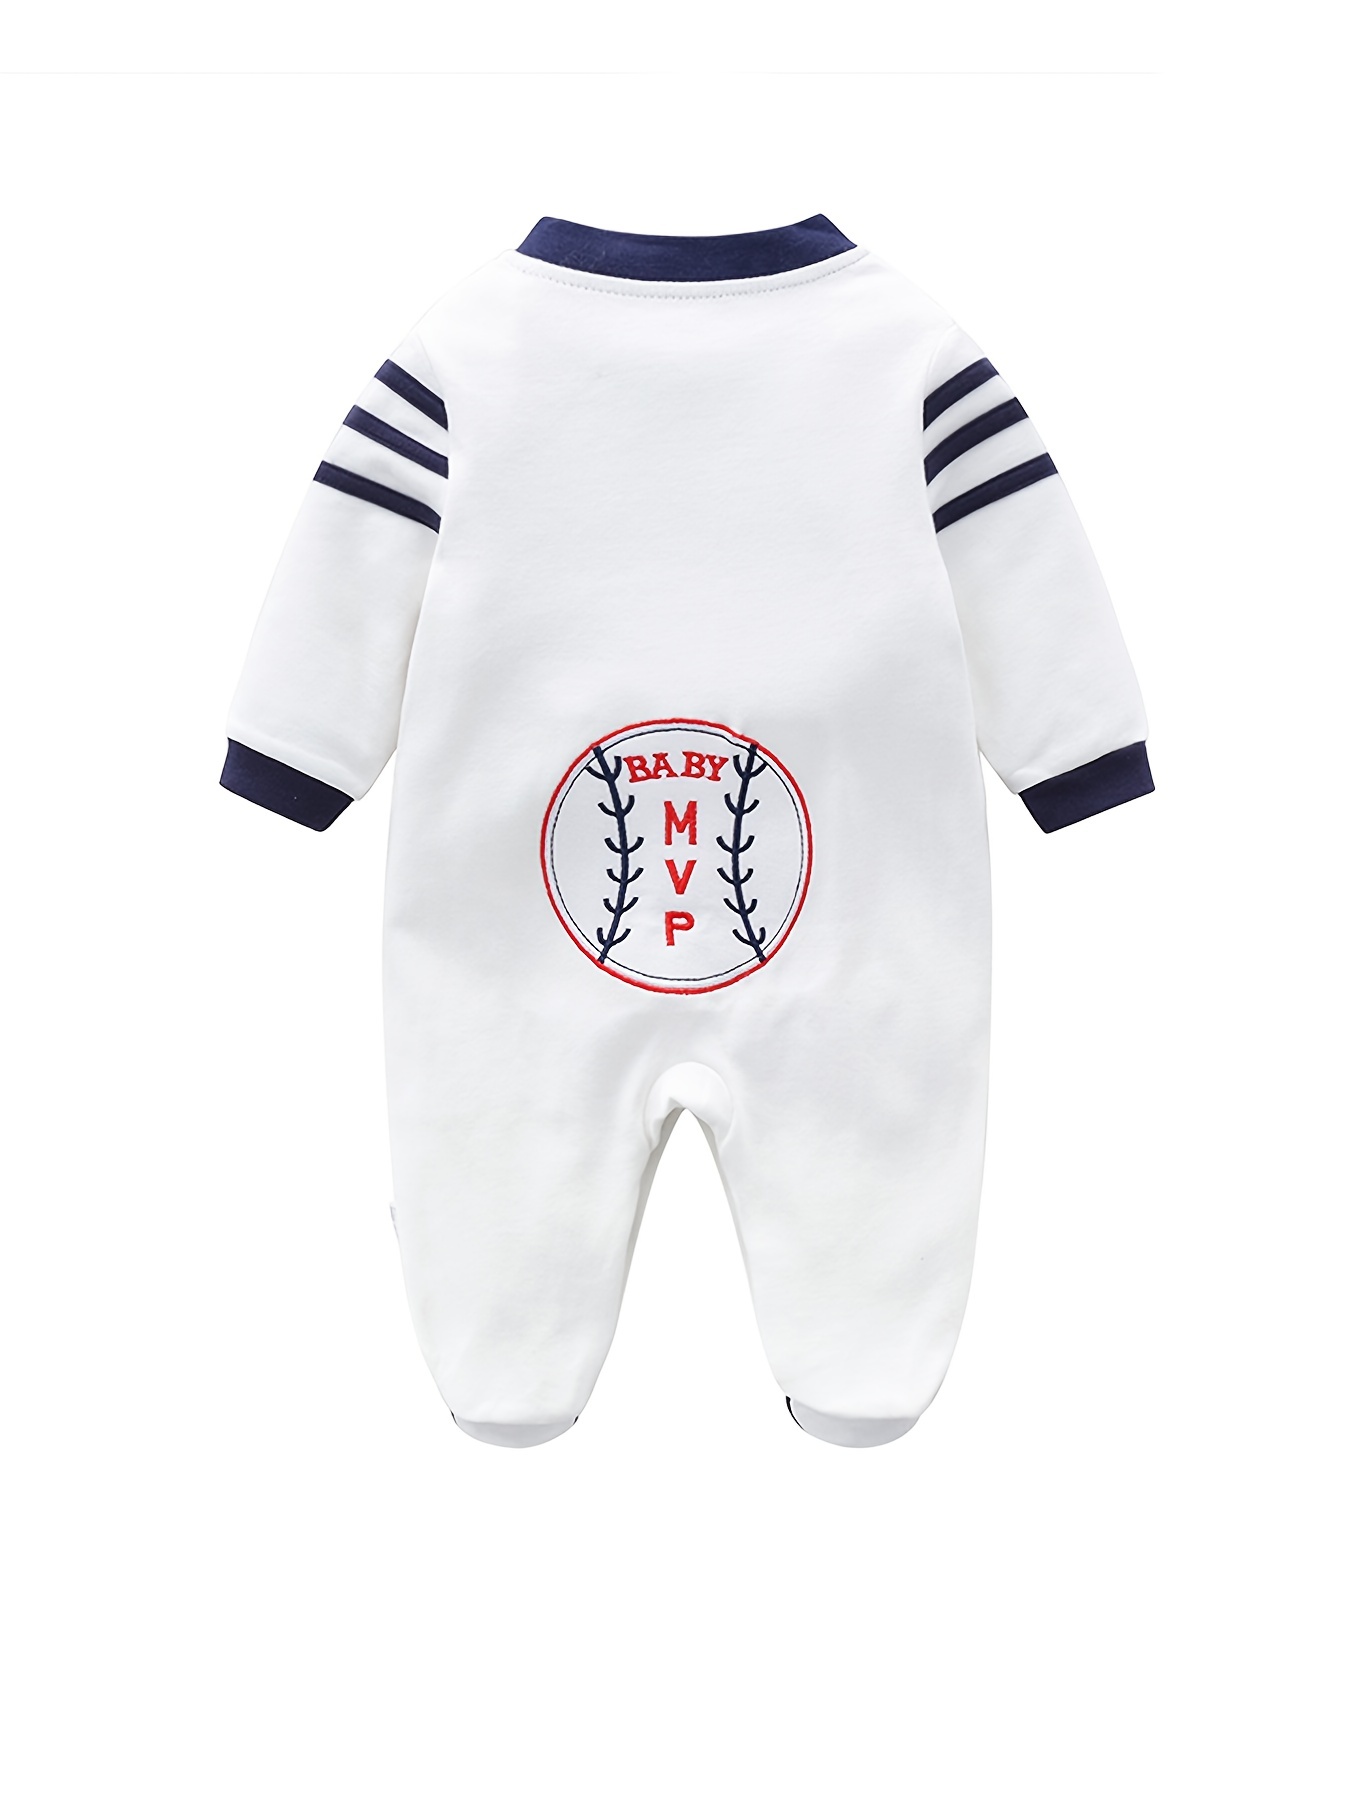 Baseball Romper Outfit